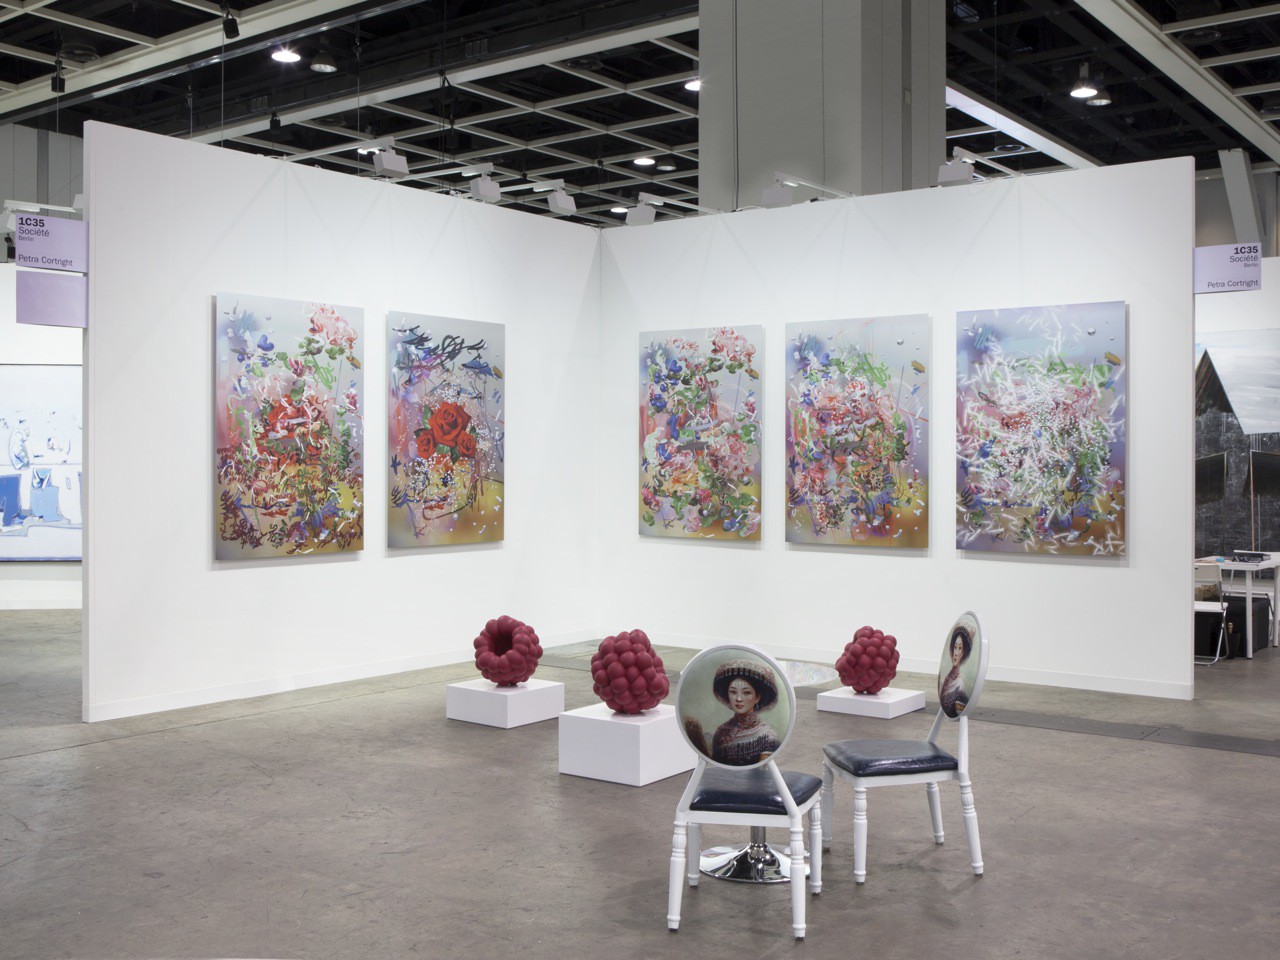 Installation view, Petra Cortright: ART BASEL HONG KONG 2017, Art Basel Hong Kong, Hong Kong, 2017